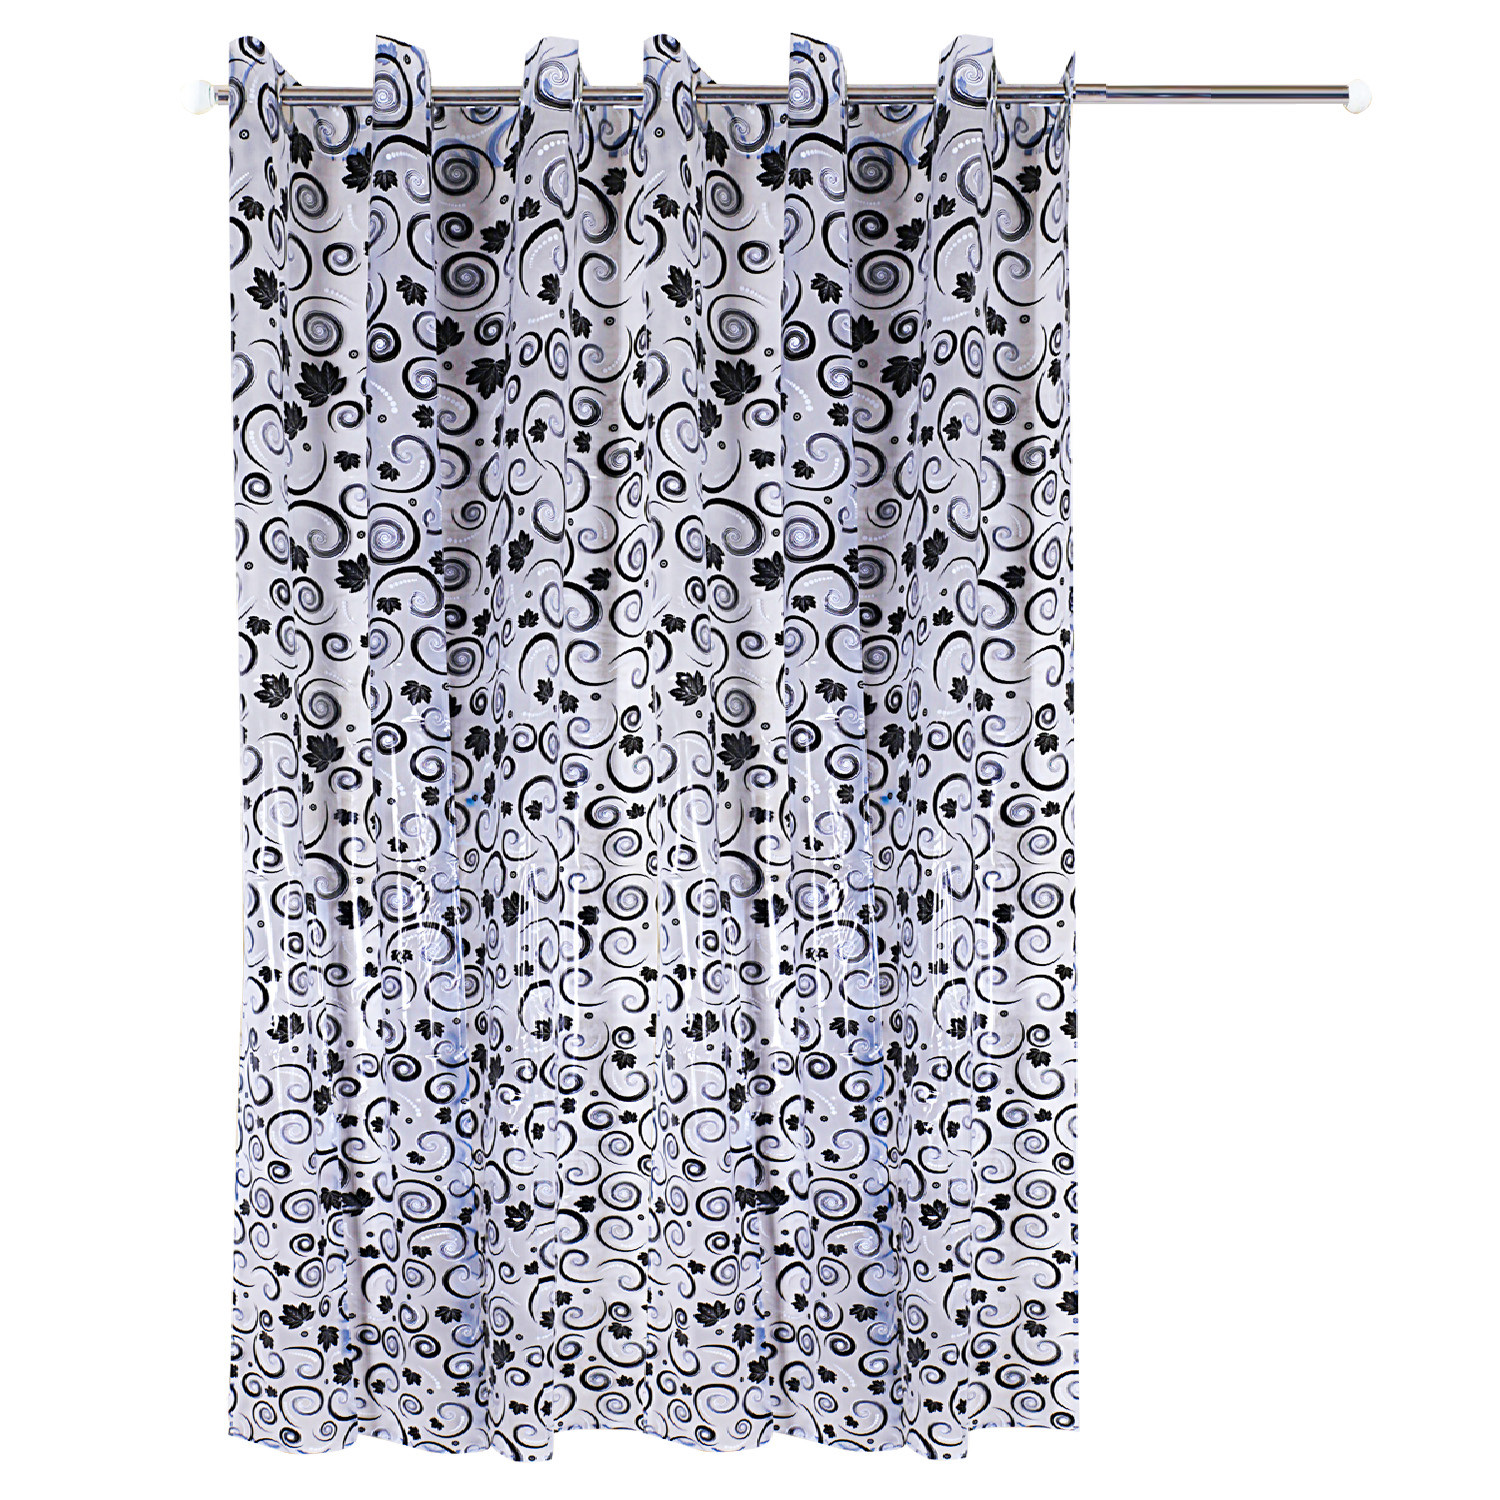 Kuber Industries PVC Spiral Print Door Curtain|AC Curtain Parda For Home Decor With 8 Steel Grommets,7 Feet,(Black)